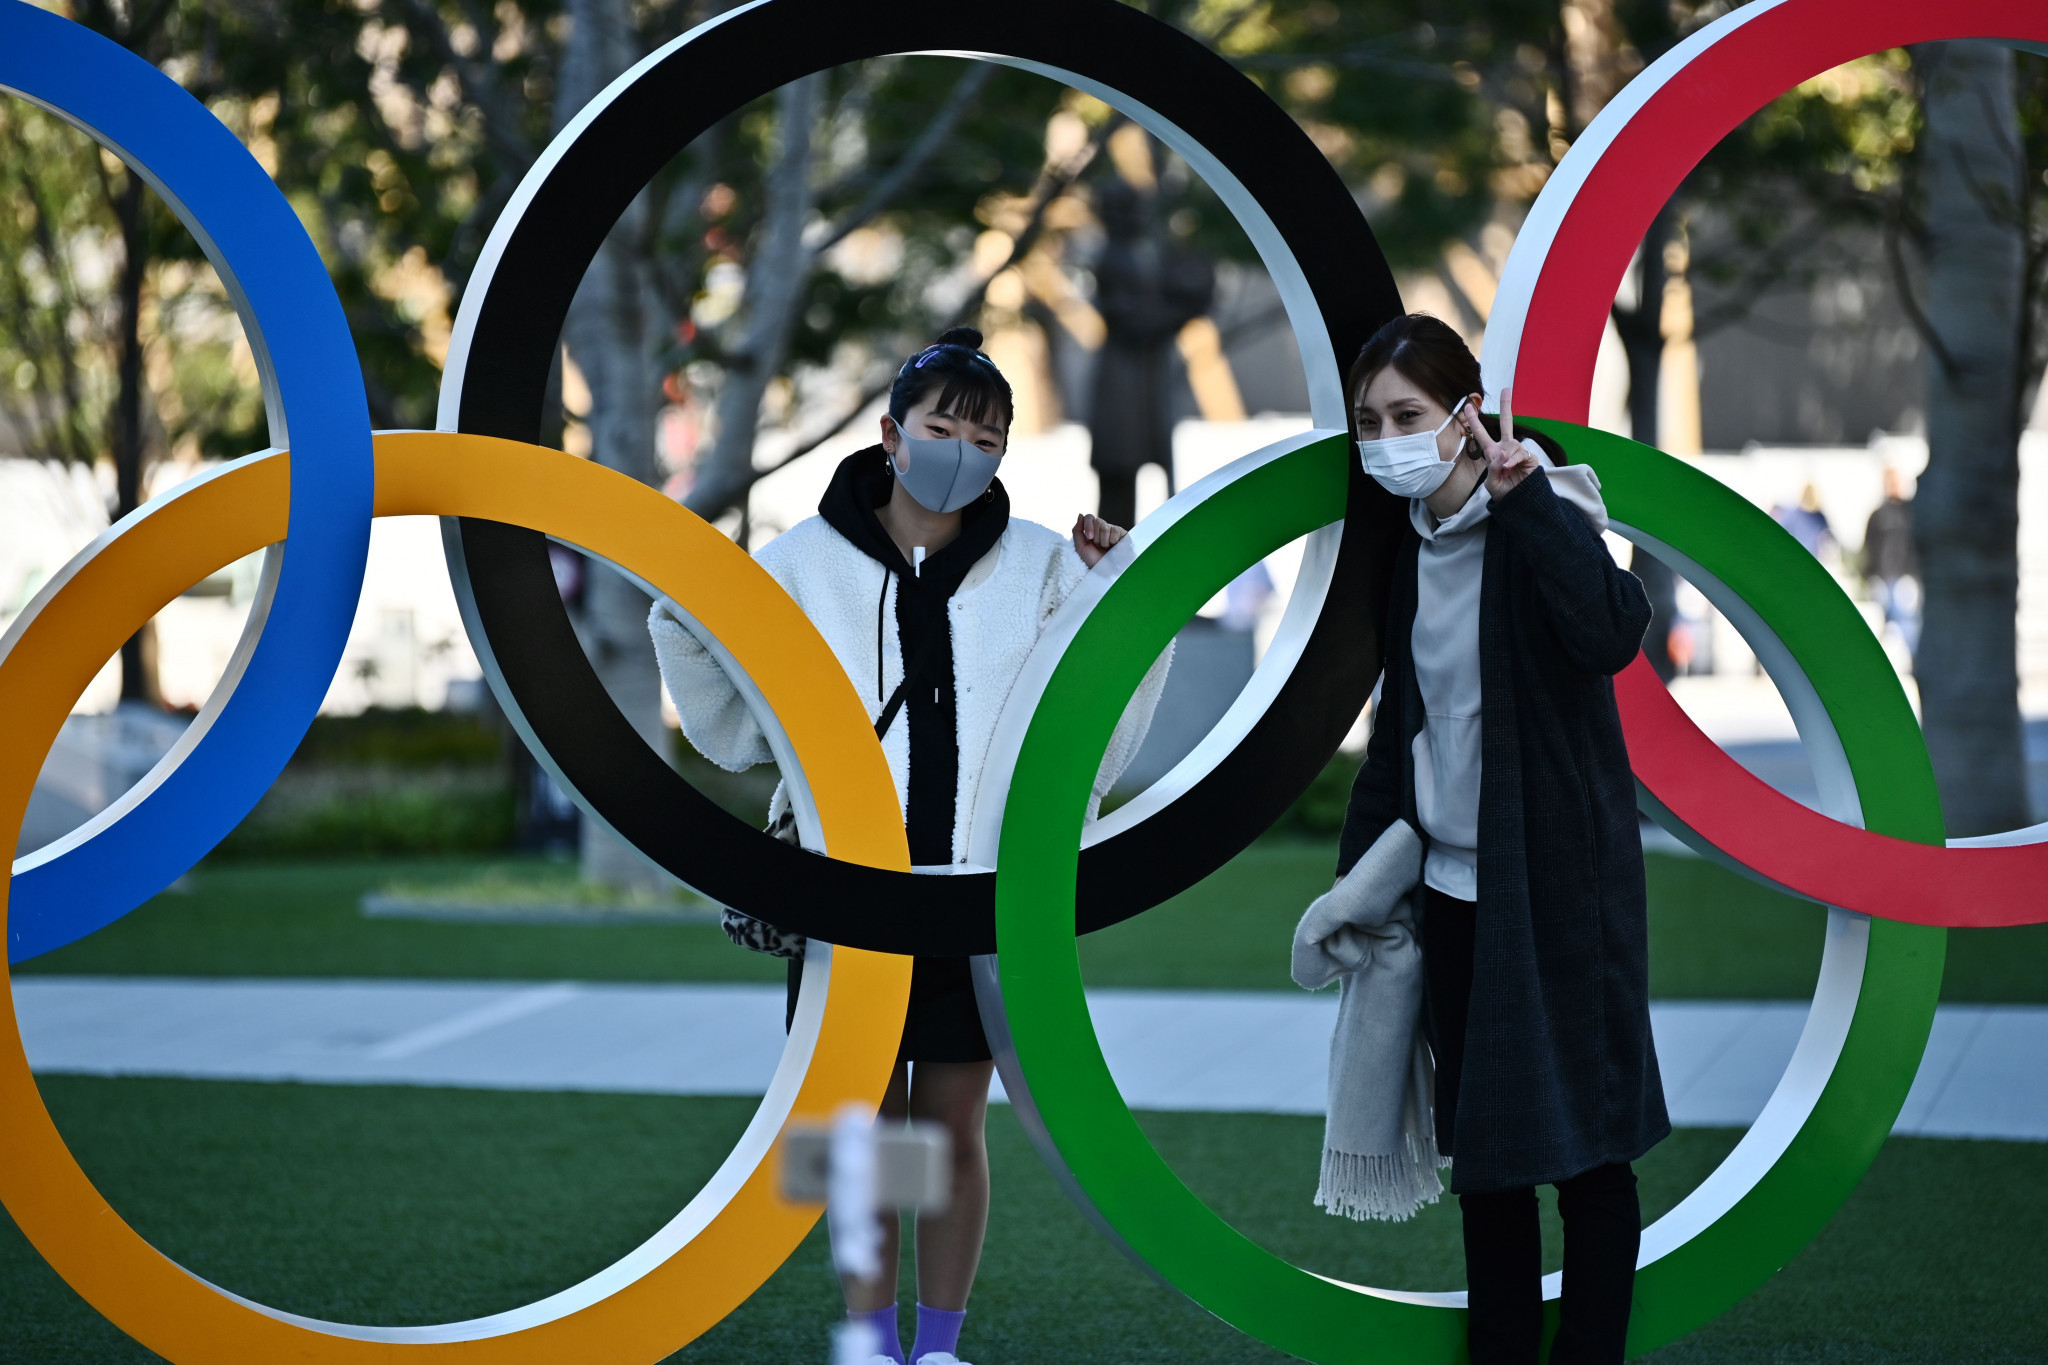 The outbreak of coronavirus has significantly impacted preparations for the Tokyo 2020 Olympic Games ©Getty Images